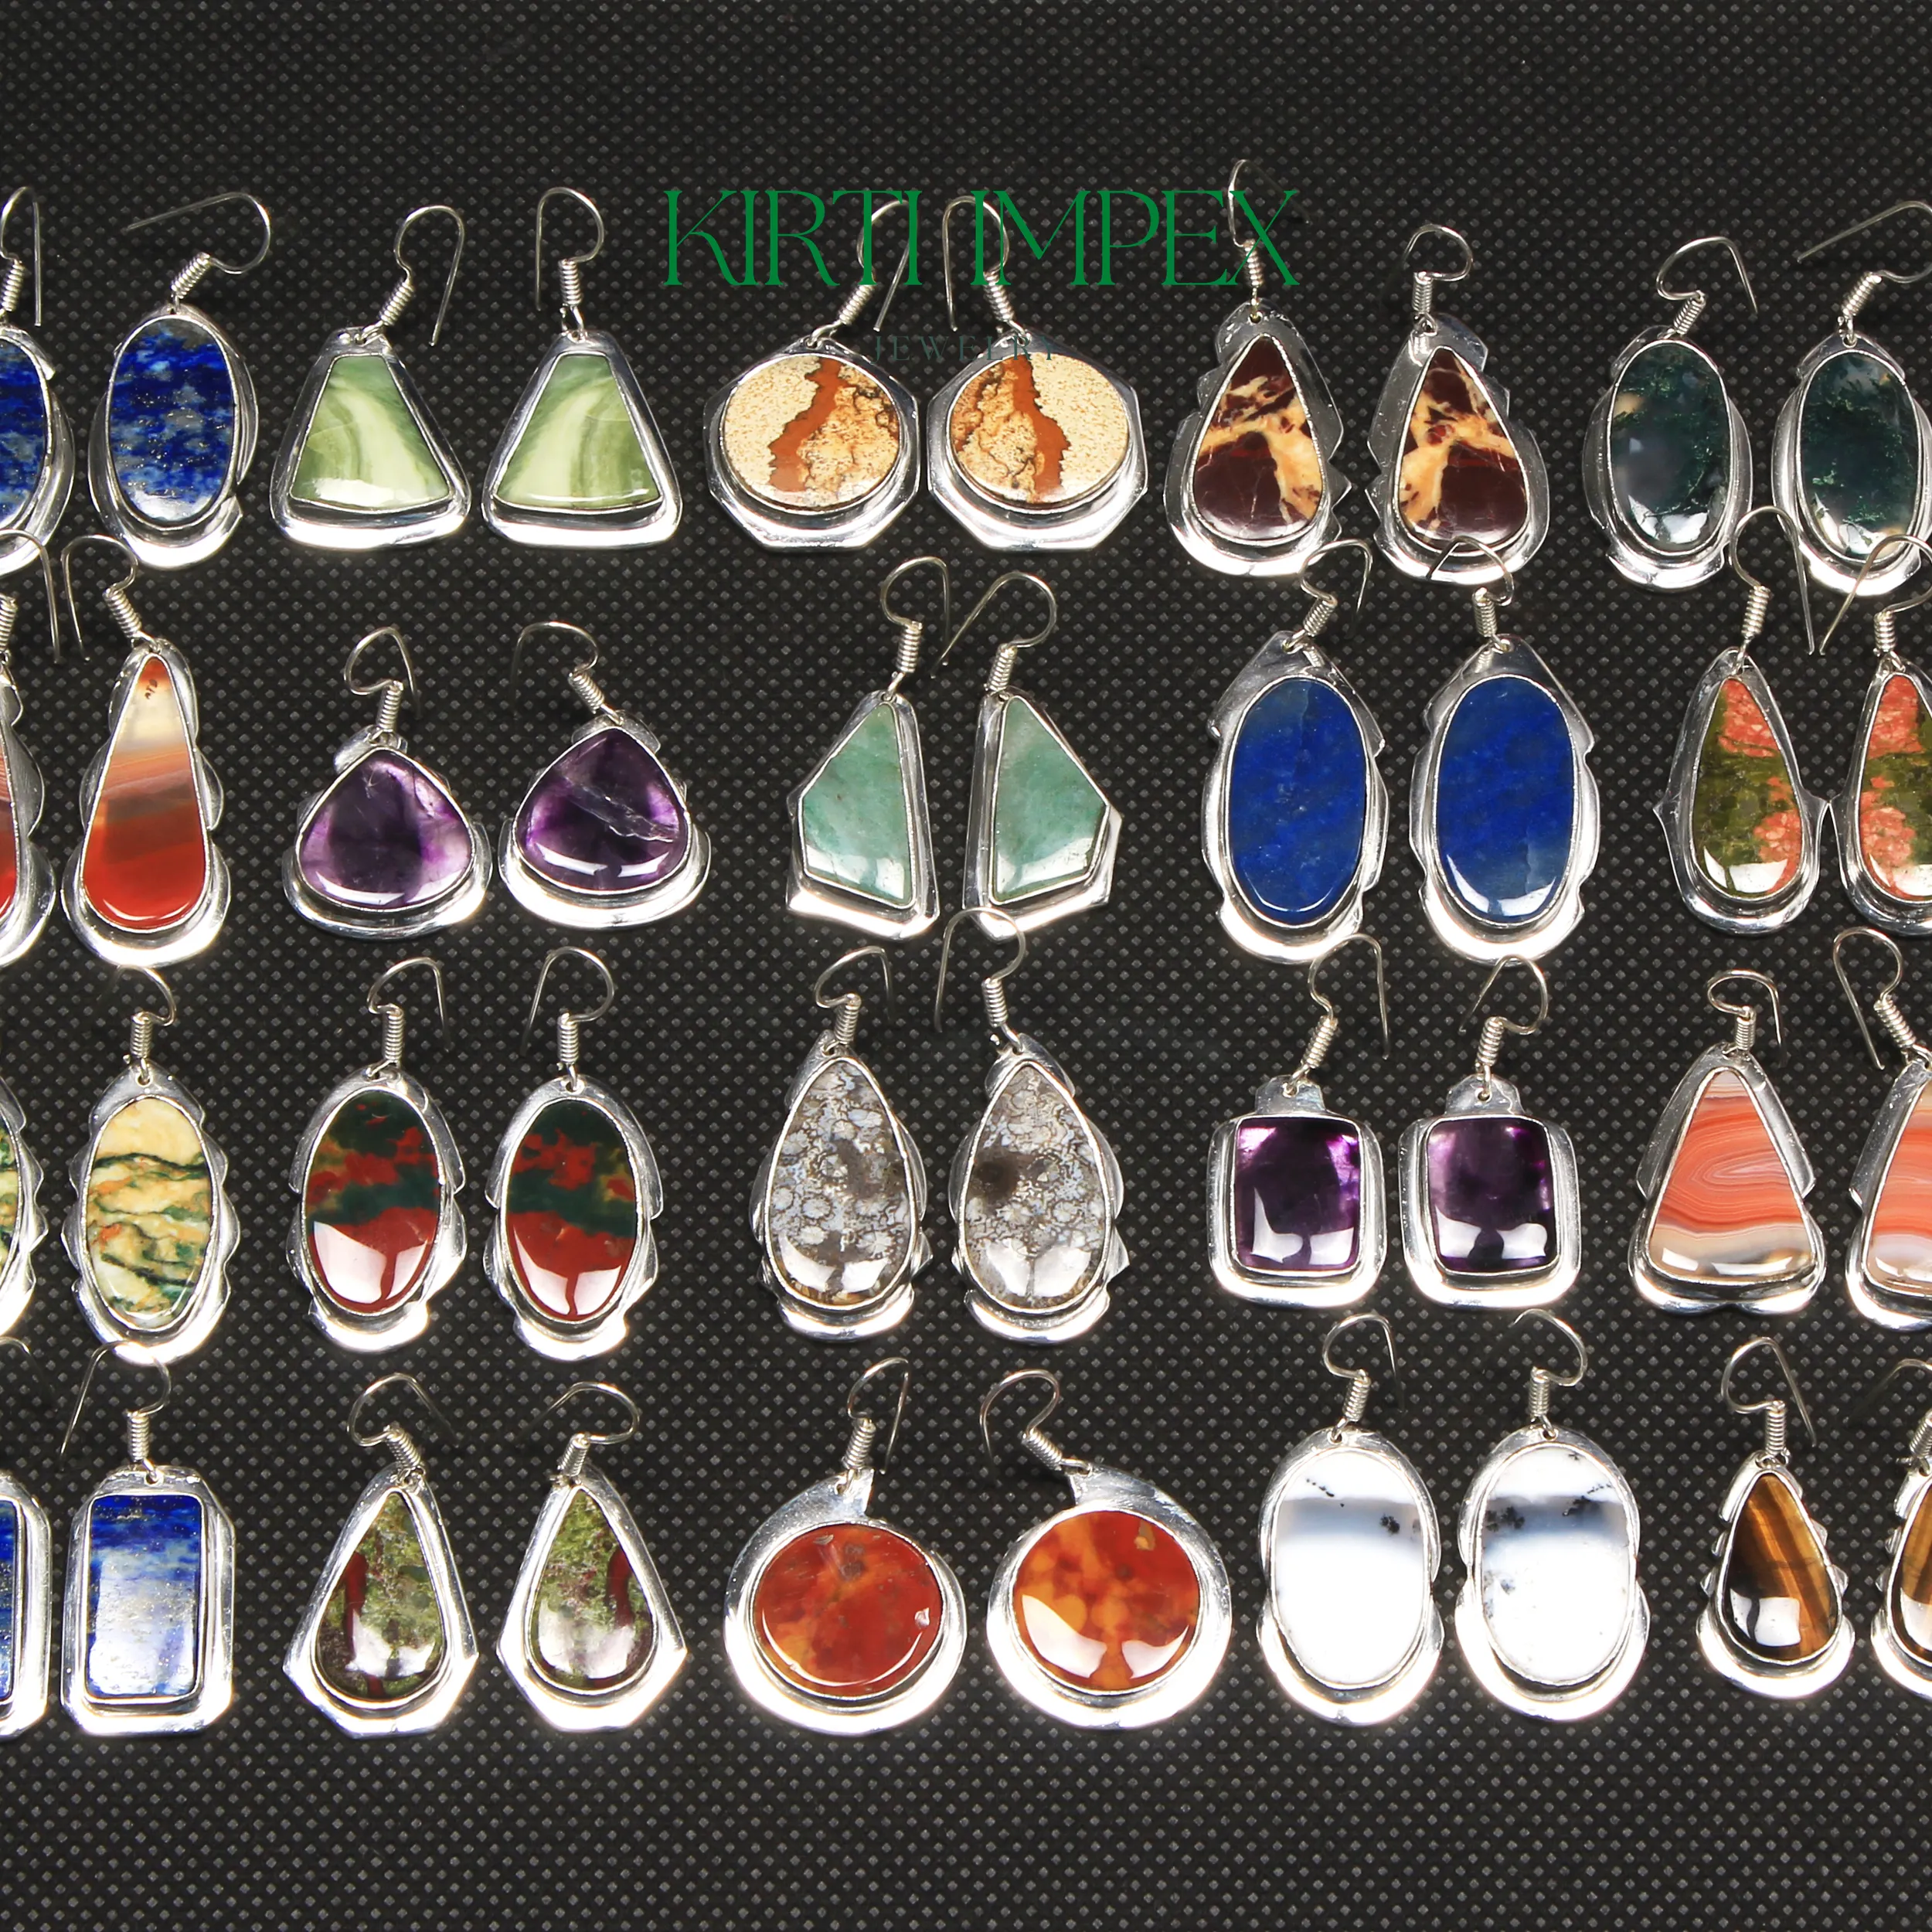 Wholesale Silver-Plated Gemstone Earrings Set - Assorted Crystal and Healing Stones for Women girls Bohemian Design Gem Eatrings